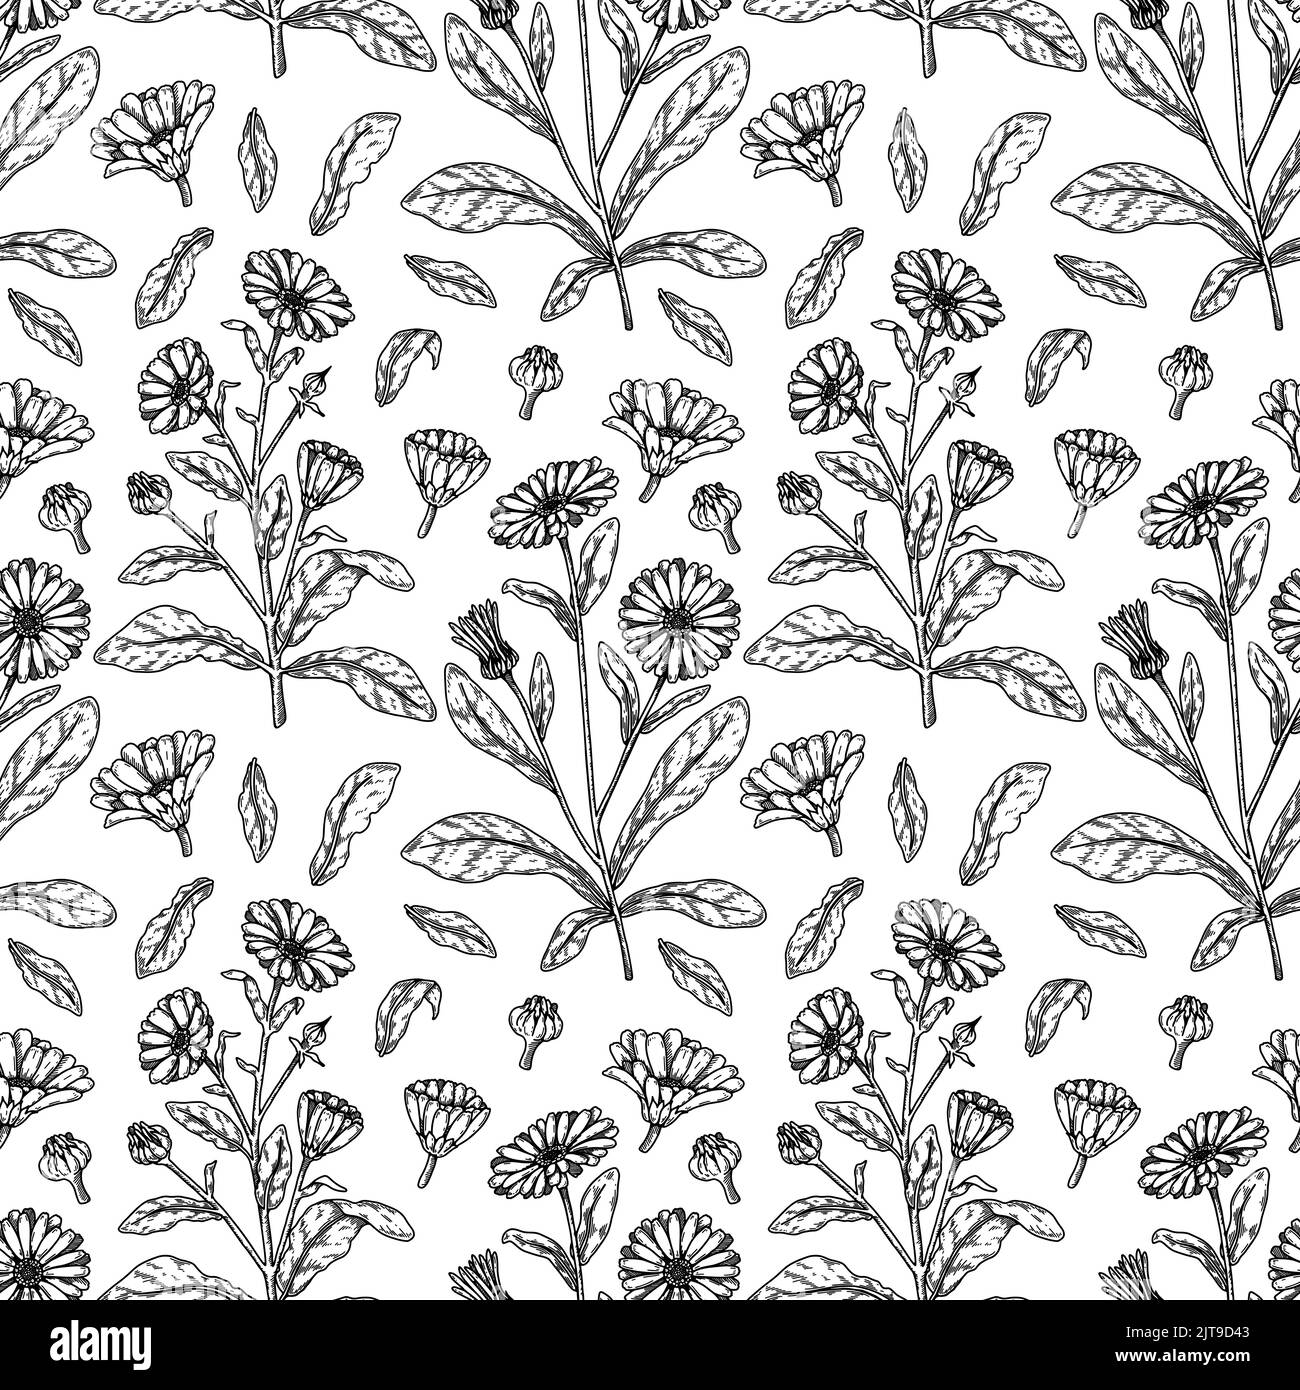 Hand drawn calendula seamless pattern. Medicinal plant botany design. Vector illustration in sketch style Stock Vector